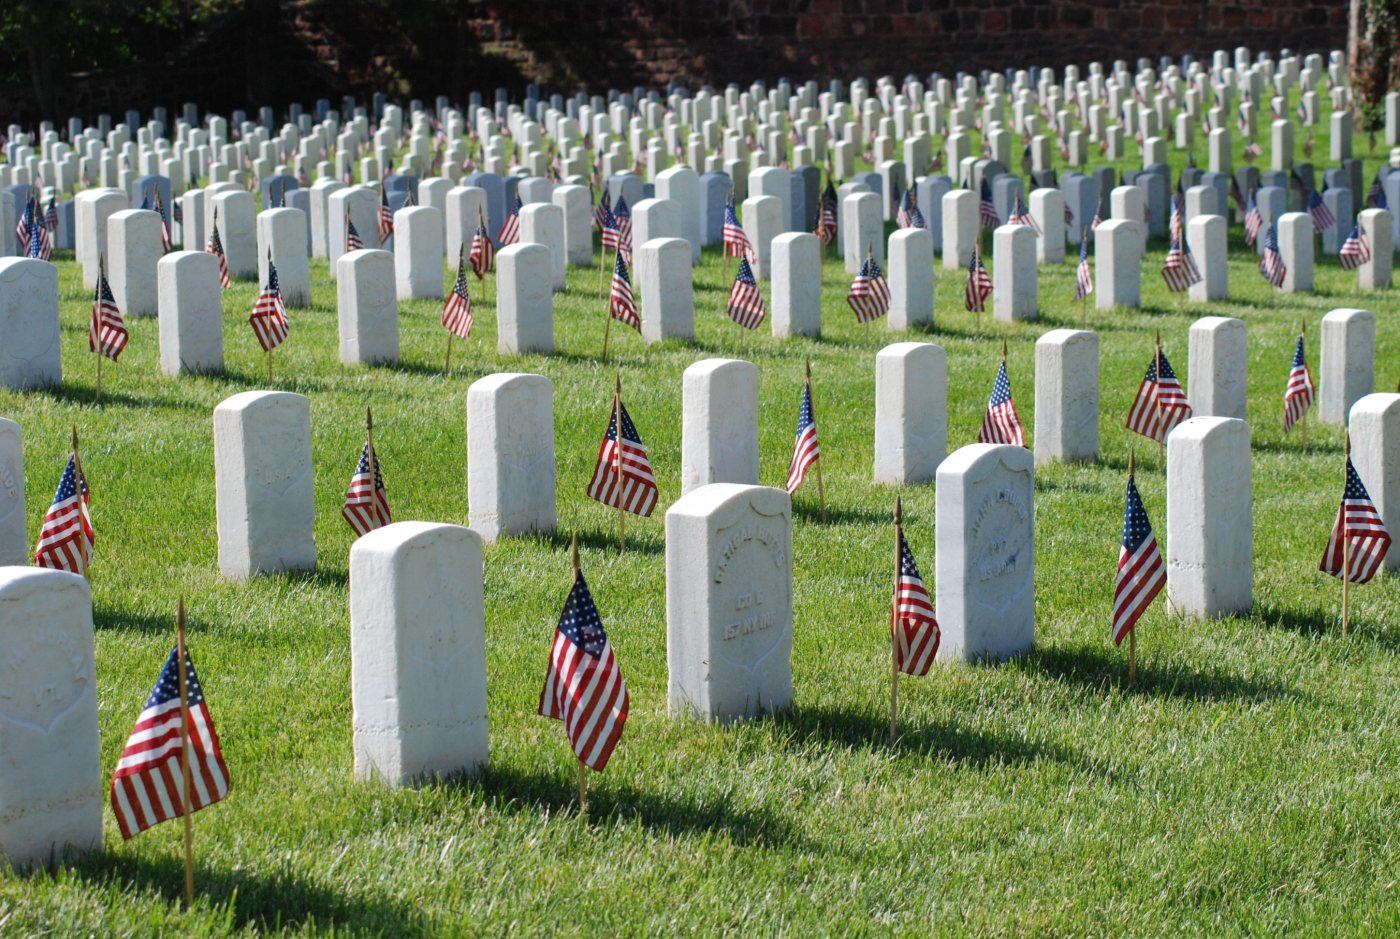 pic of gravesites with US flags